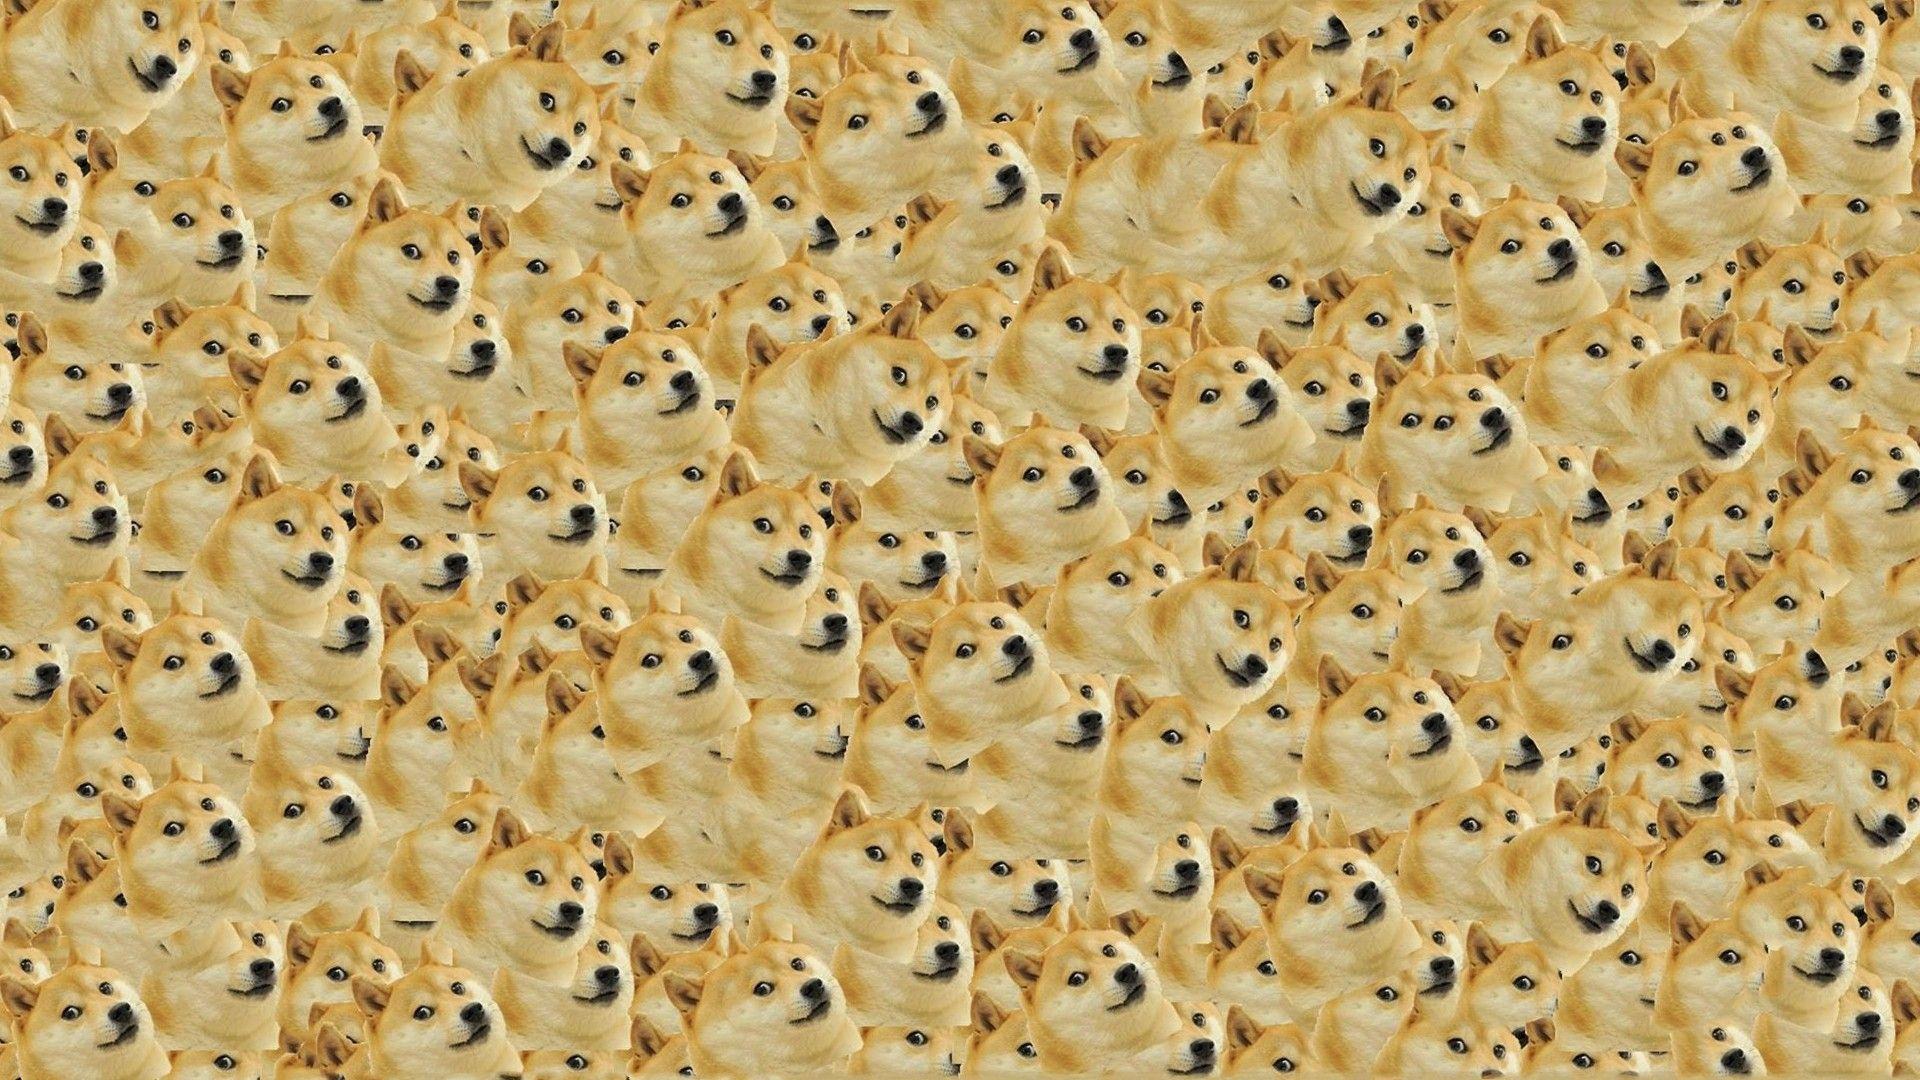 Doge in SPACE Wallpaper (1920x1080)